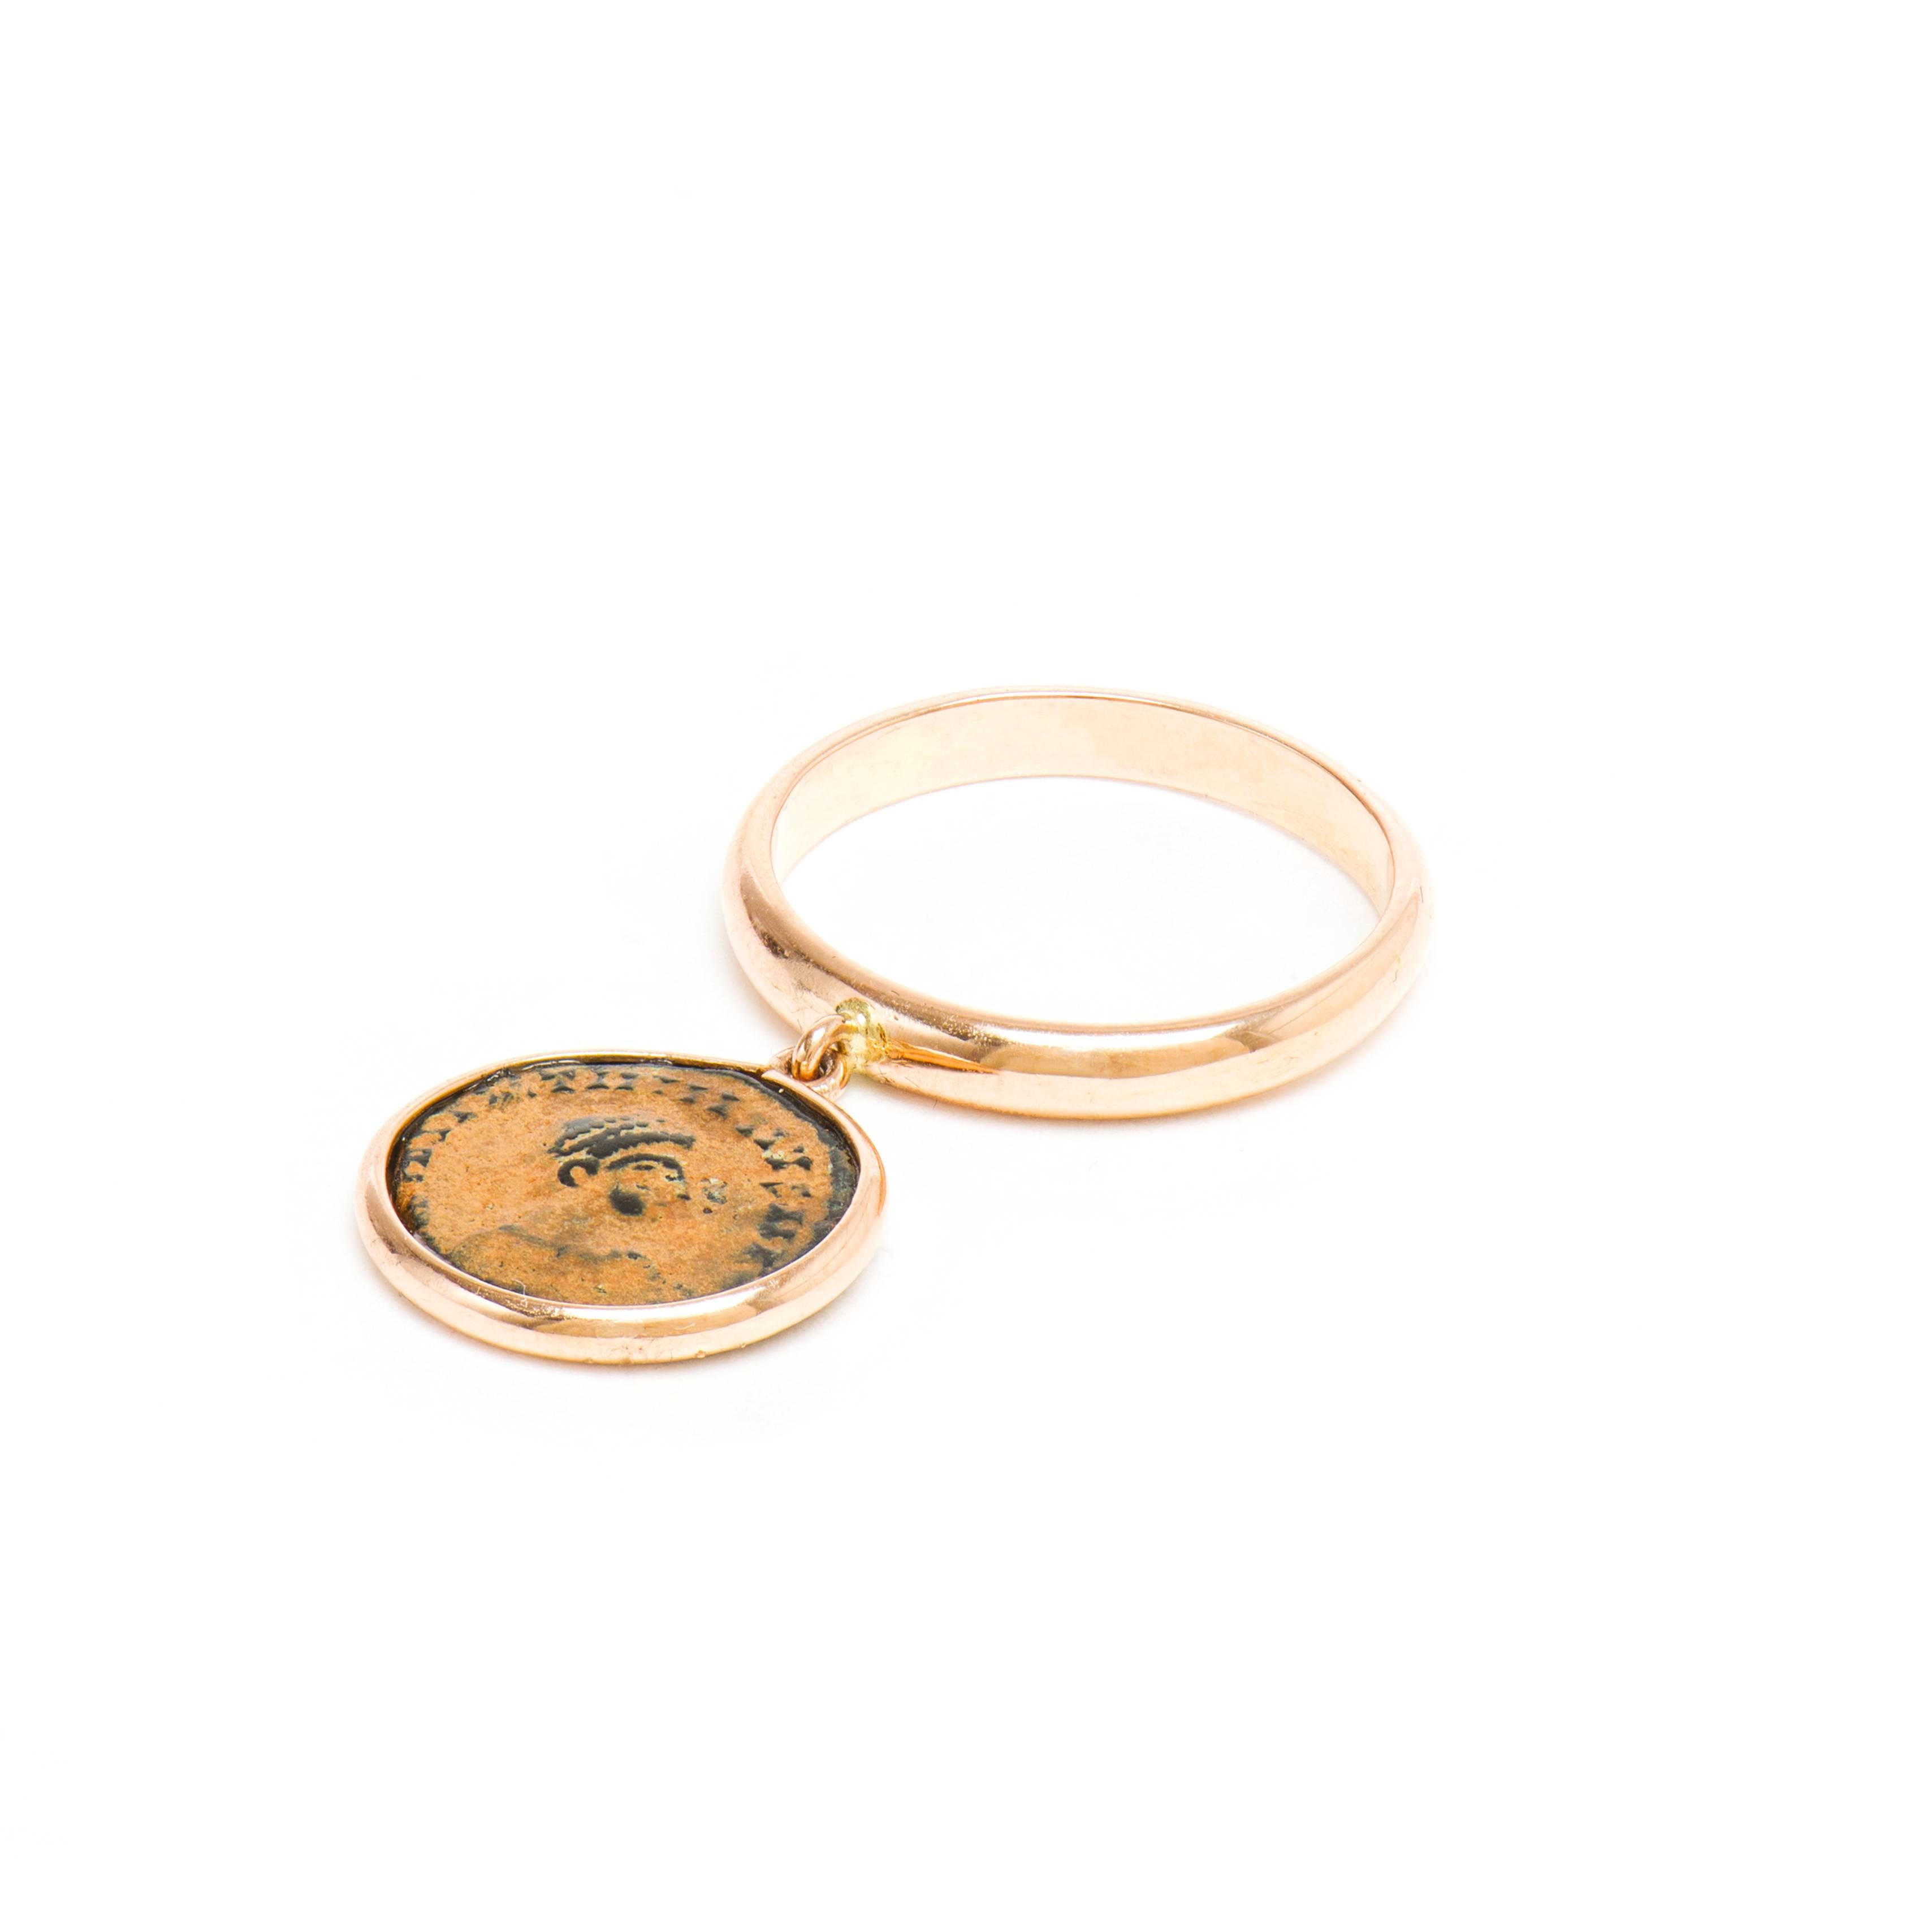 This DUBINI coin ring from the 'Empires' collection features an authentic Roman bronze coin set in 18K rose gold.

Ring sizes available: 52 (US 6)

Additional sizes may be ordered with a lead time of 2-3 weeks.

* Due to the unique process of hand